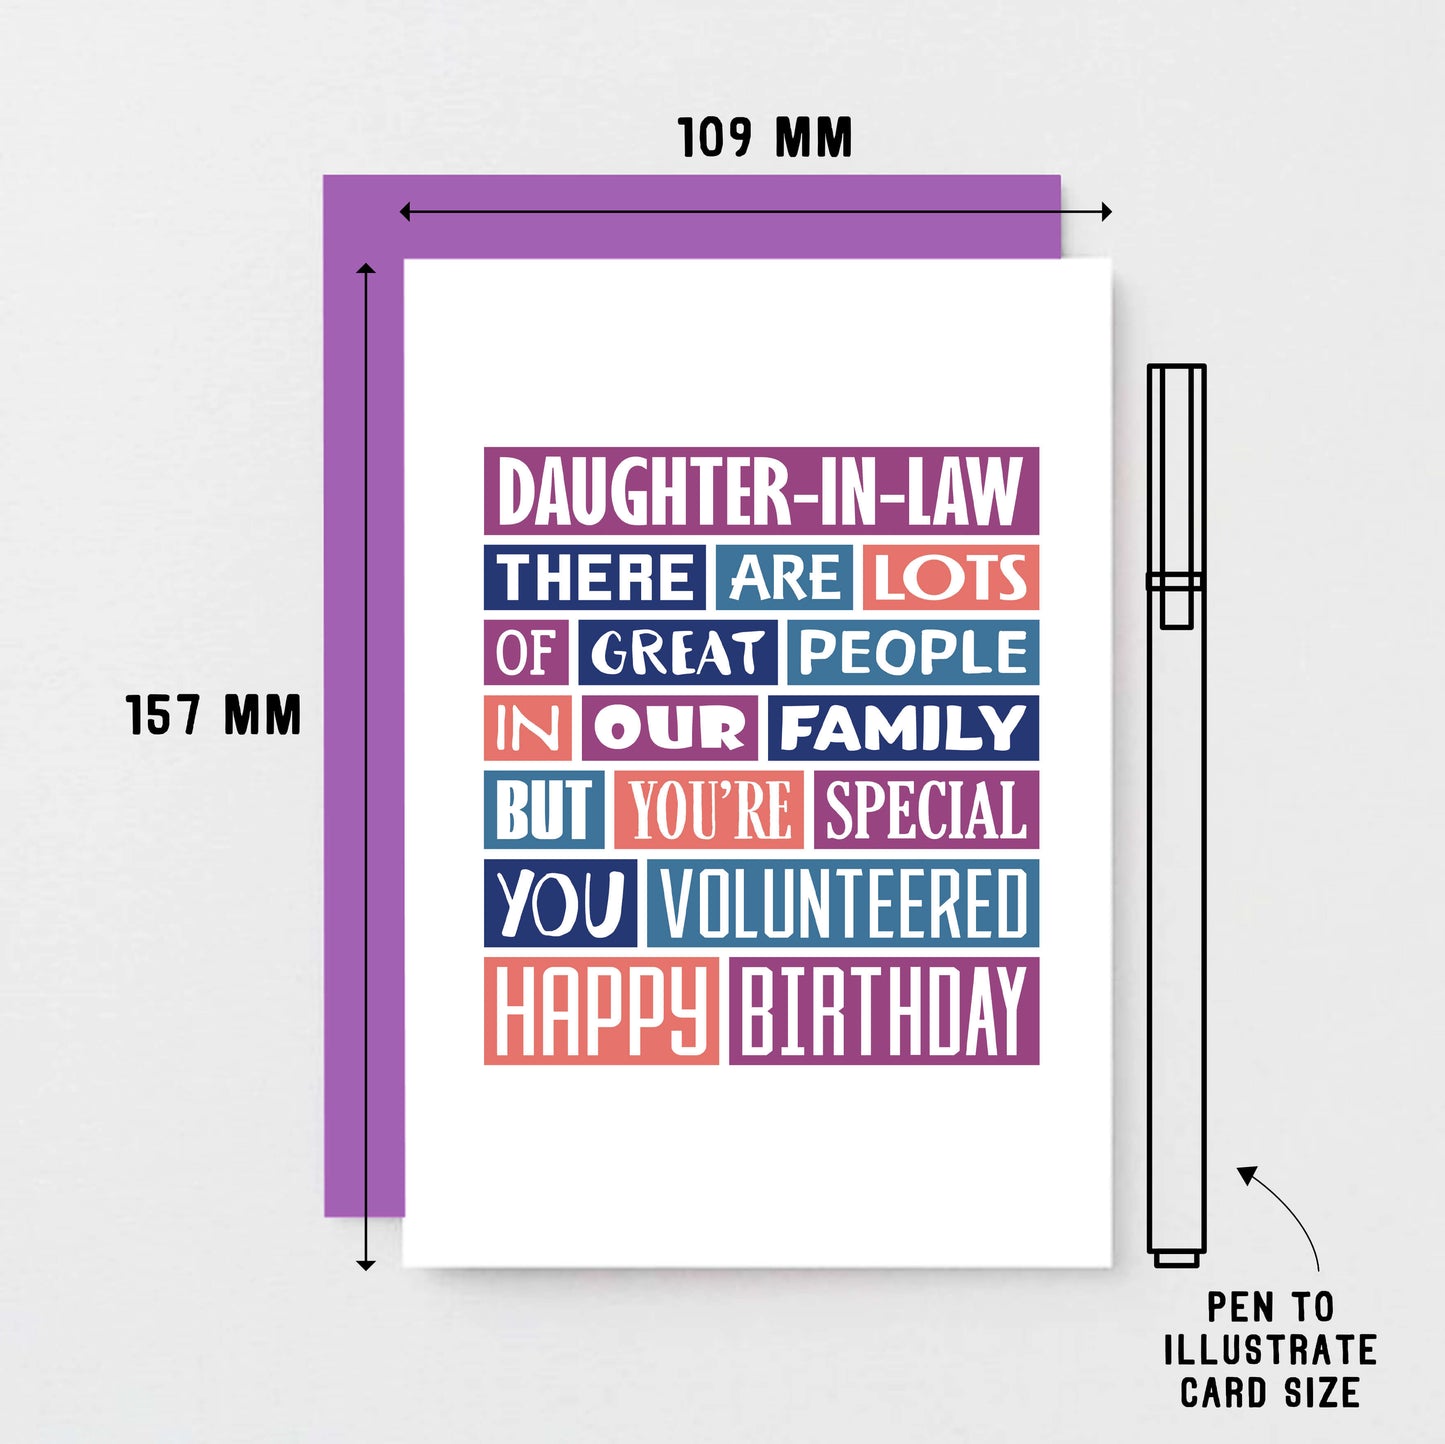 Daughter-in-Law Birthday Card by SixElevenCreations. Reads Daughter-in-Law There are lots of great people in our family but you're special. You volunteered. Happy birthday. Product Code SE0343A6